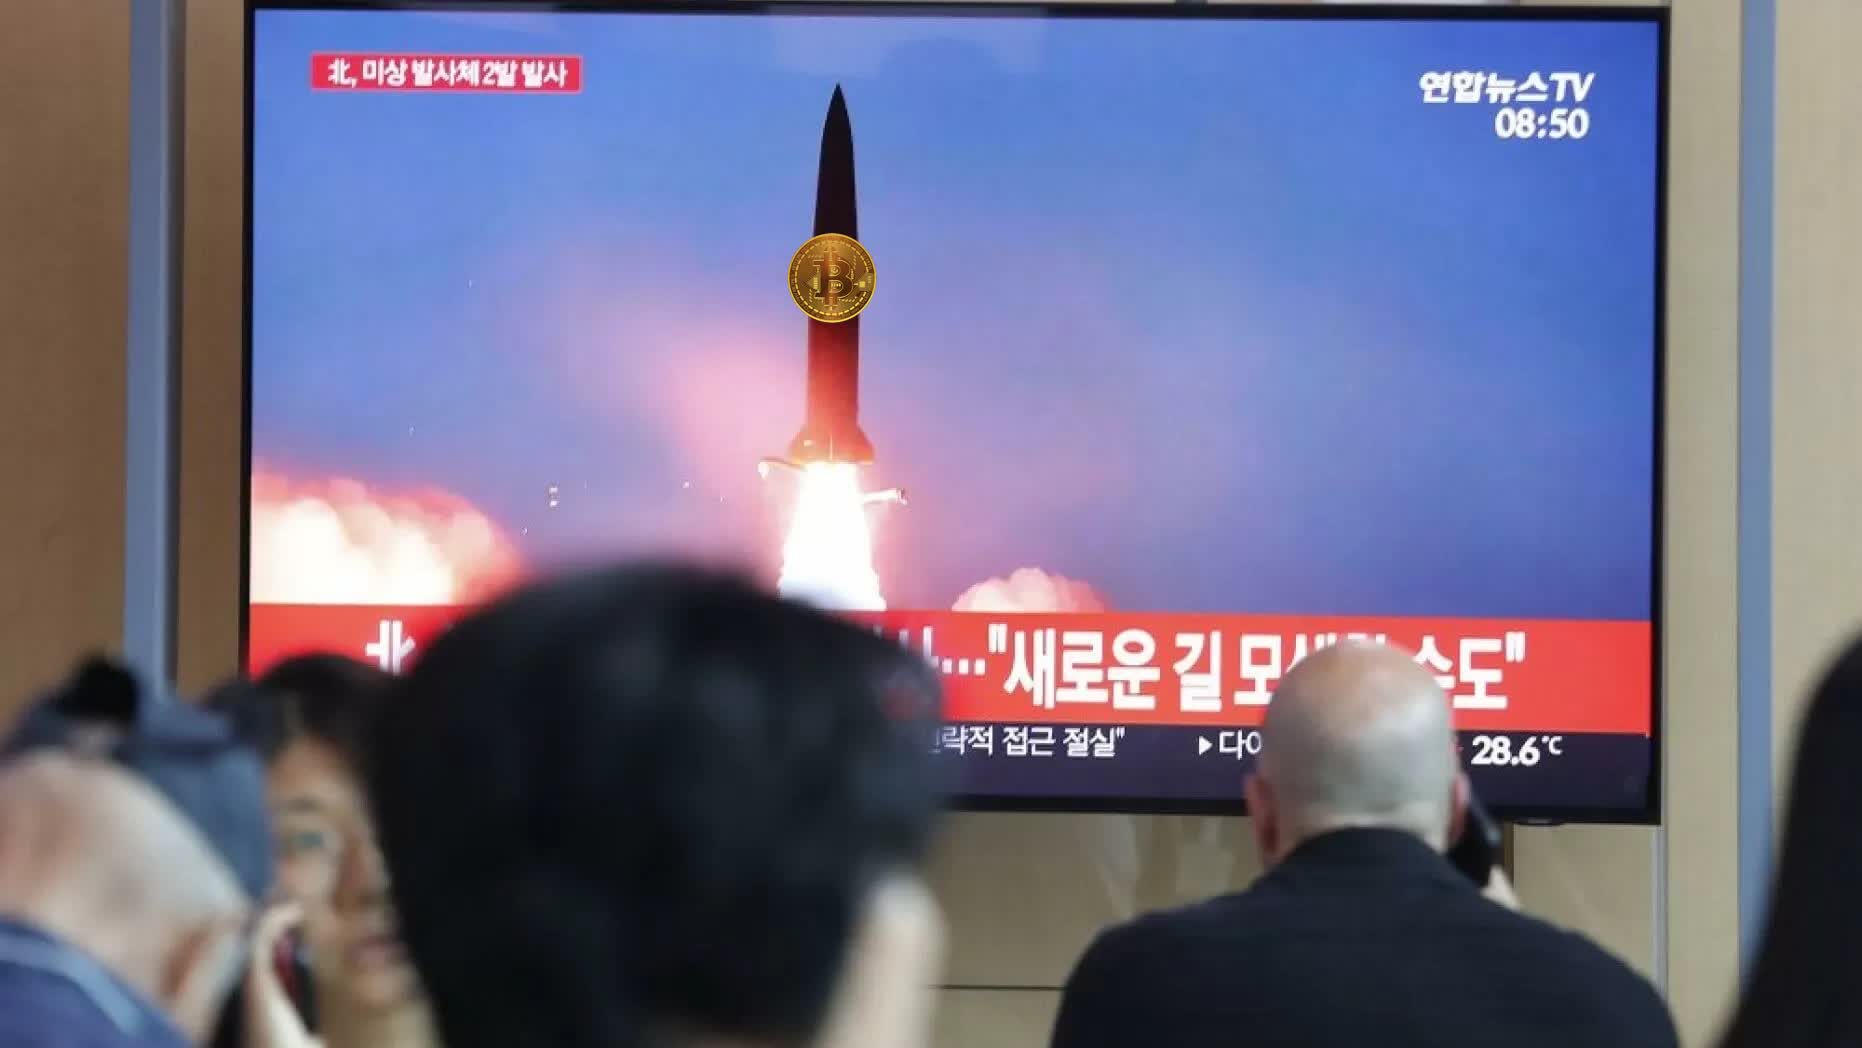 Crypto winter wipes out large chunk of North Korea's weapons program funding